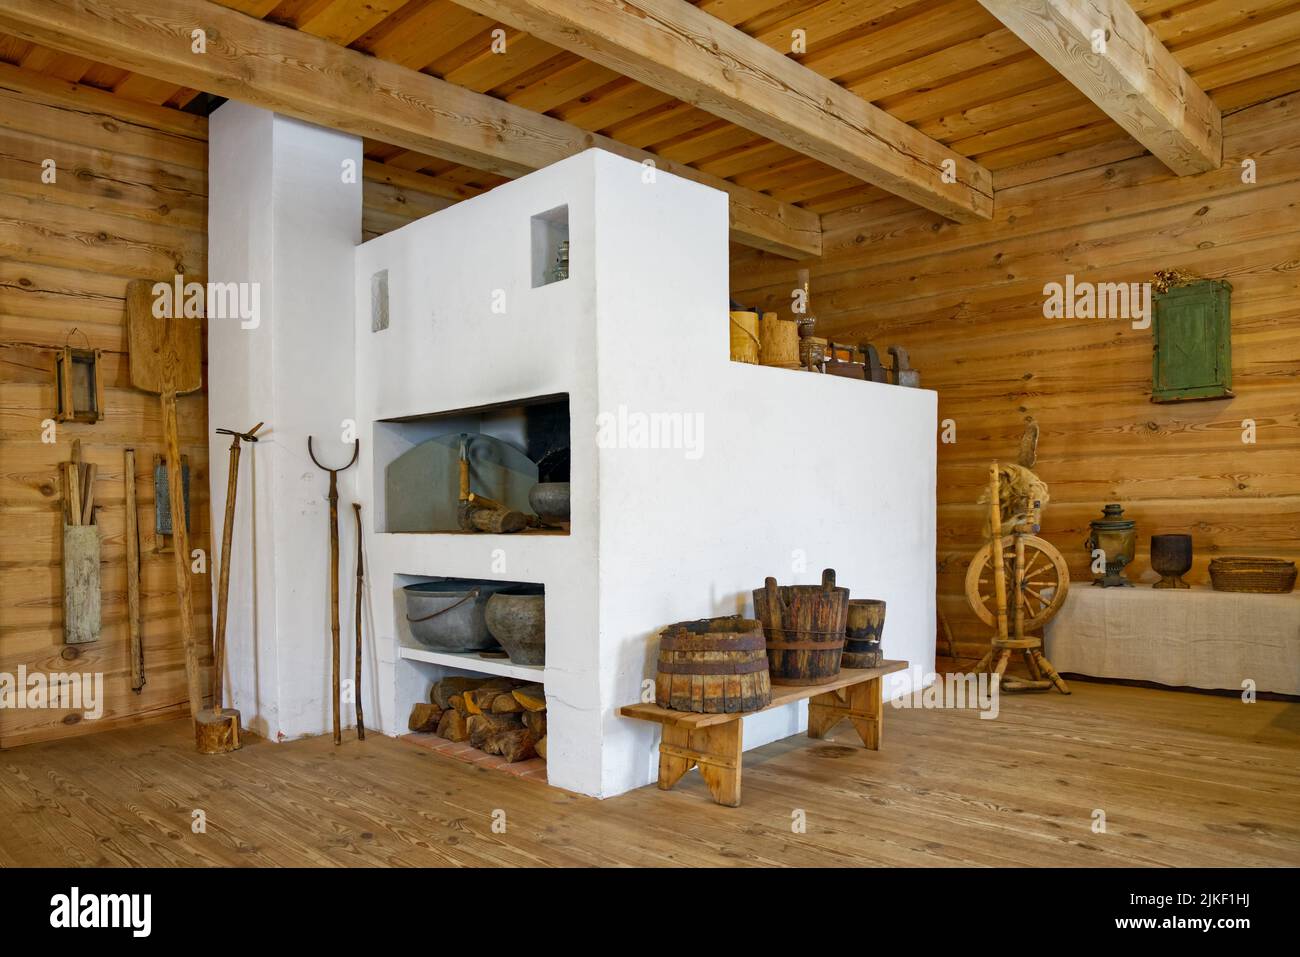 The interior of an old Russian house with a traditional oven. Russian stove and furniture. Stock Photo